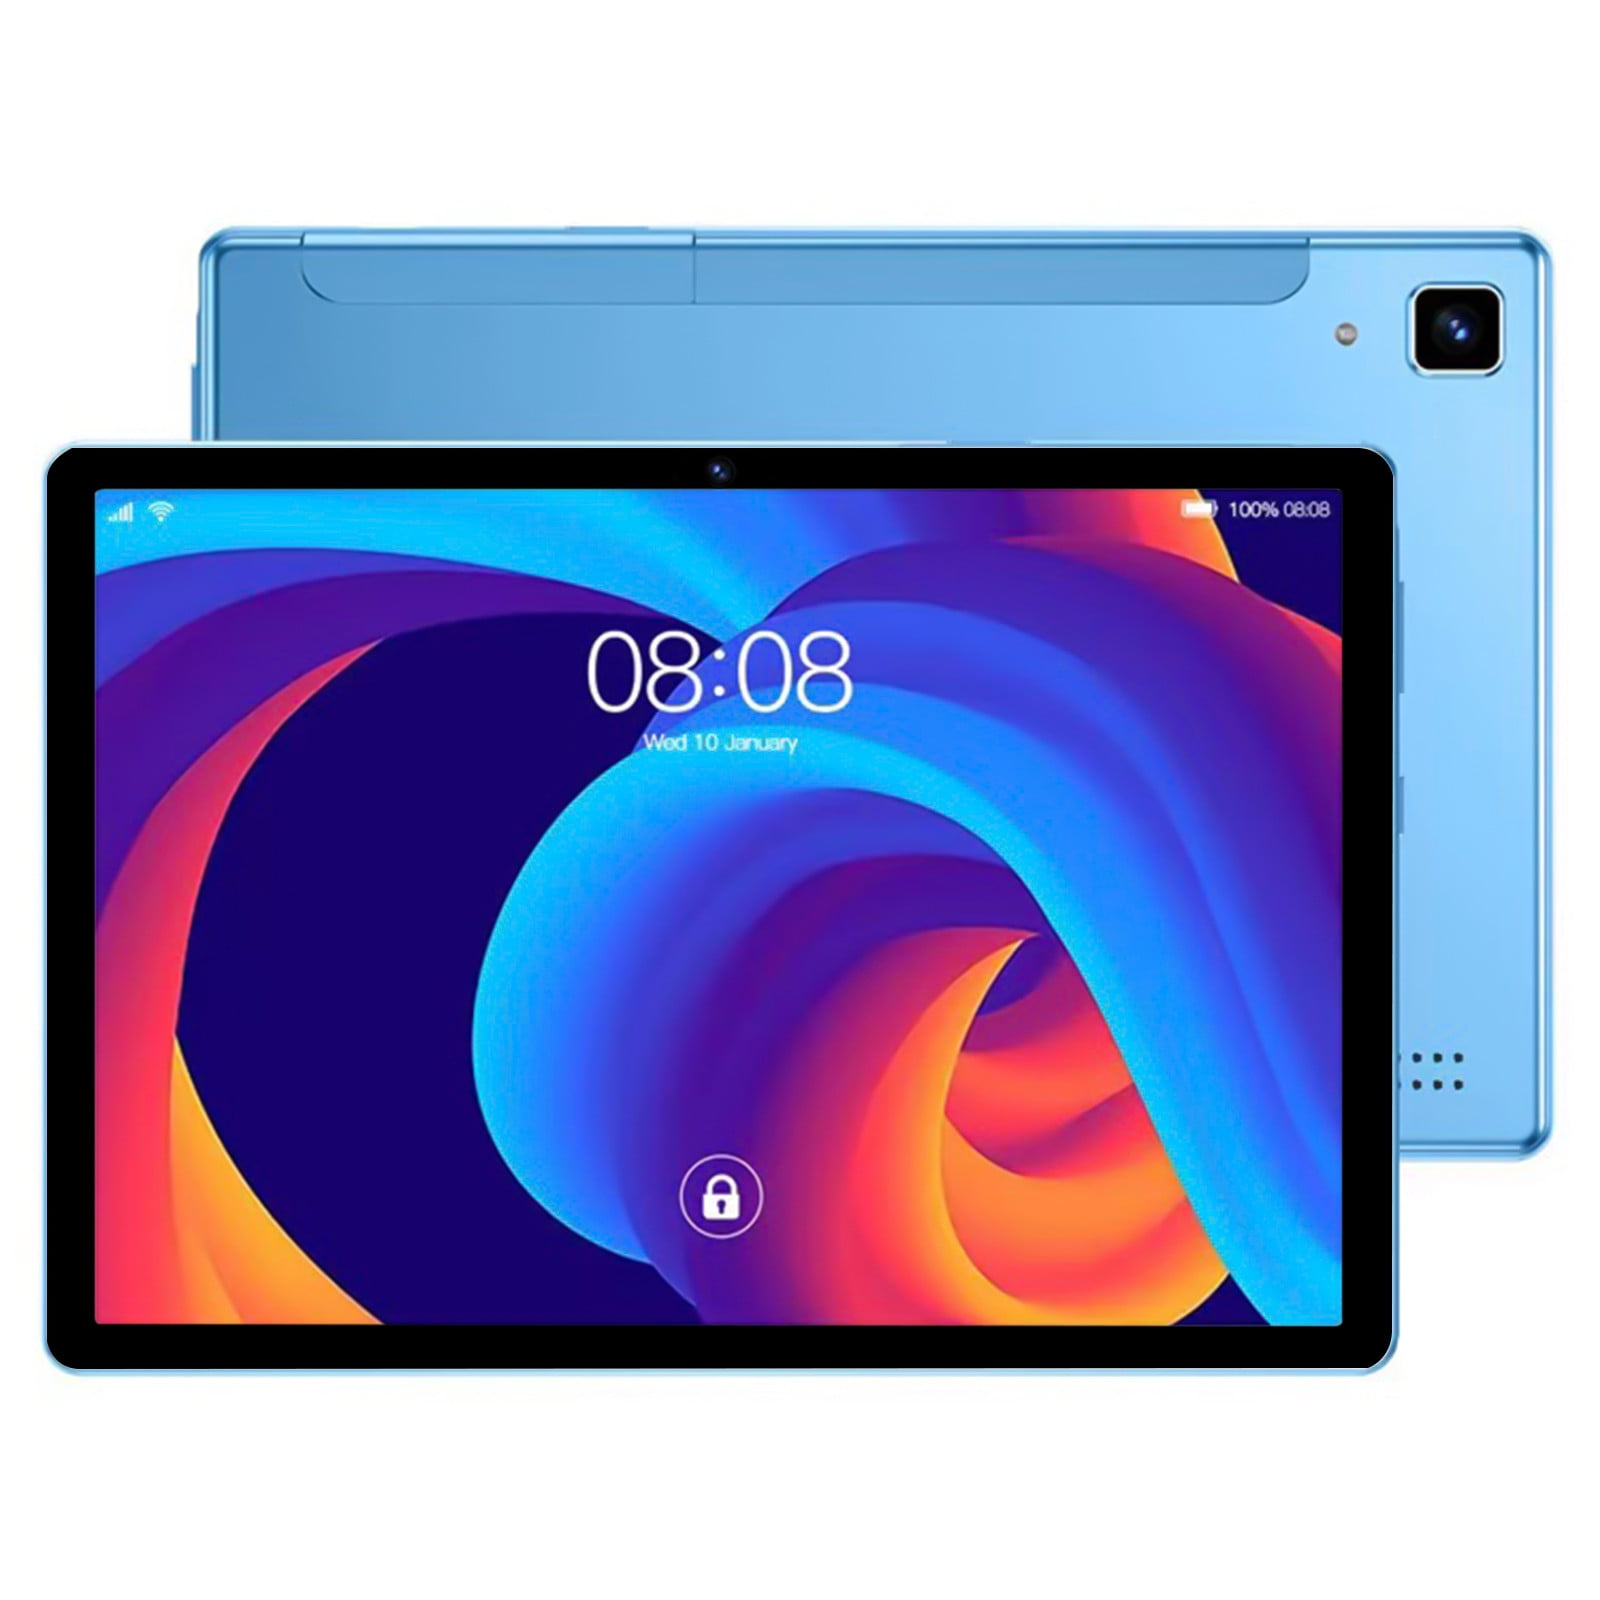 Tablet Android 5.1 Operating System 8-inch HD Octa-core Processor 1GB RAM And 16GB ROM TF Expansion Support Built-in WiFi Bluetooth GPS Tablet - Walmart.com